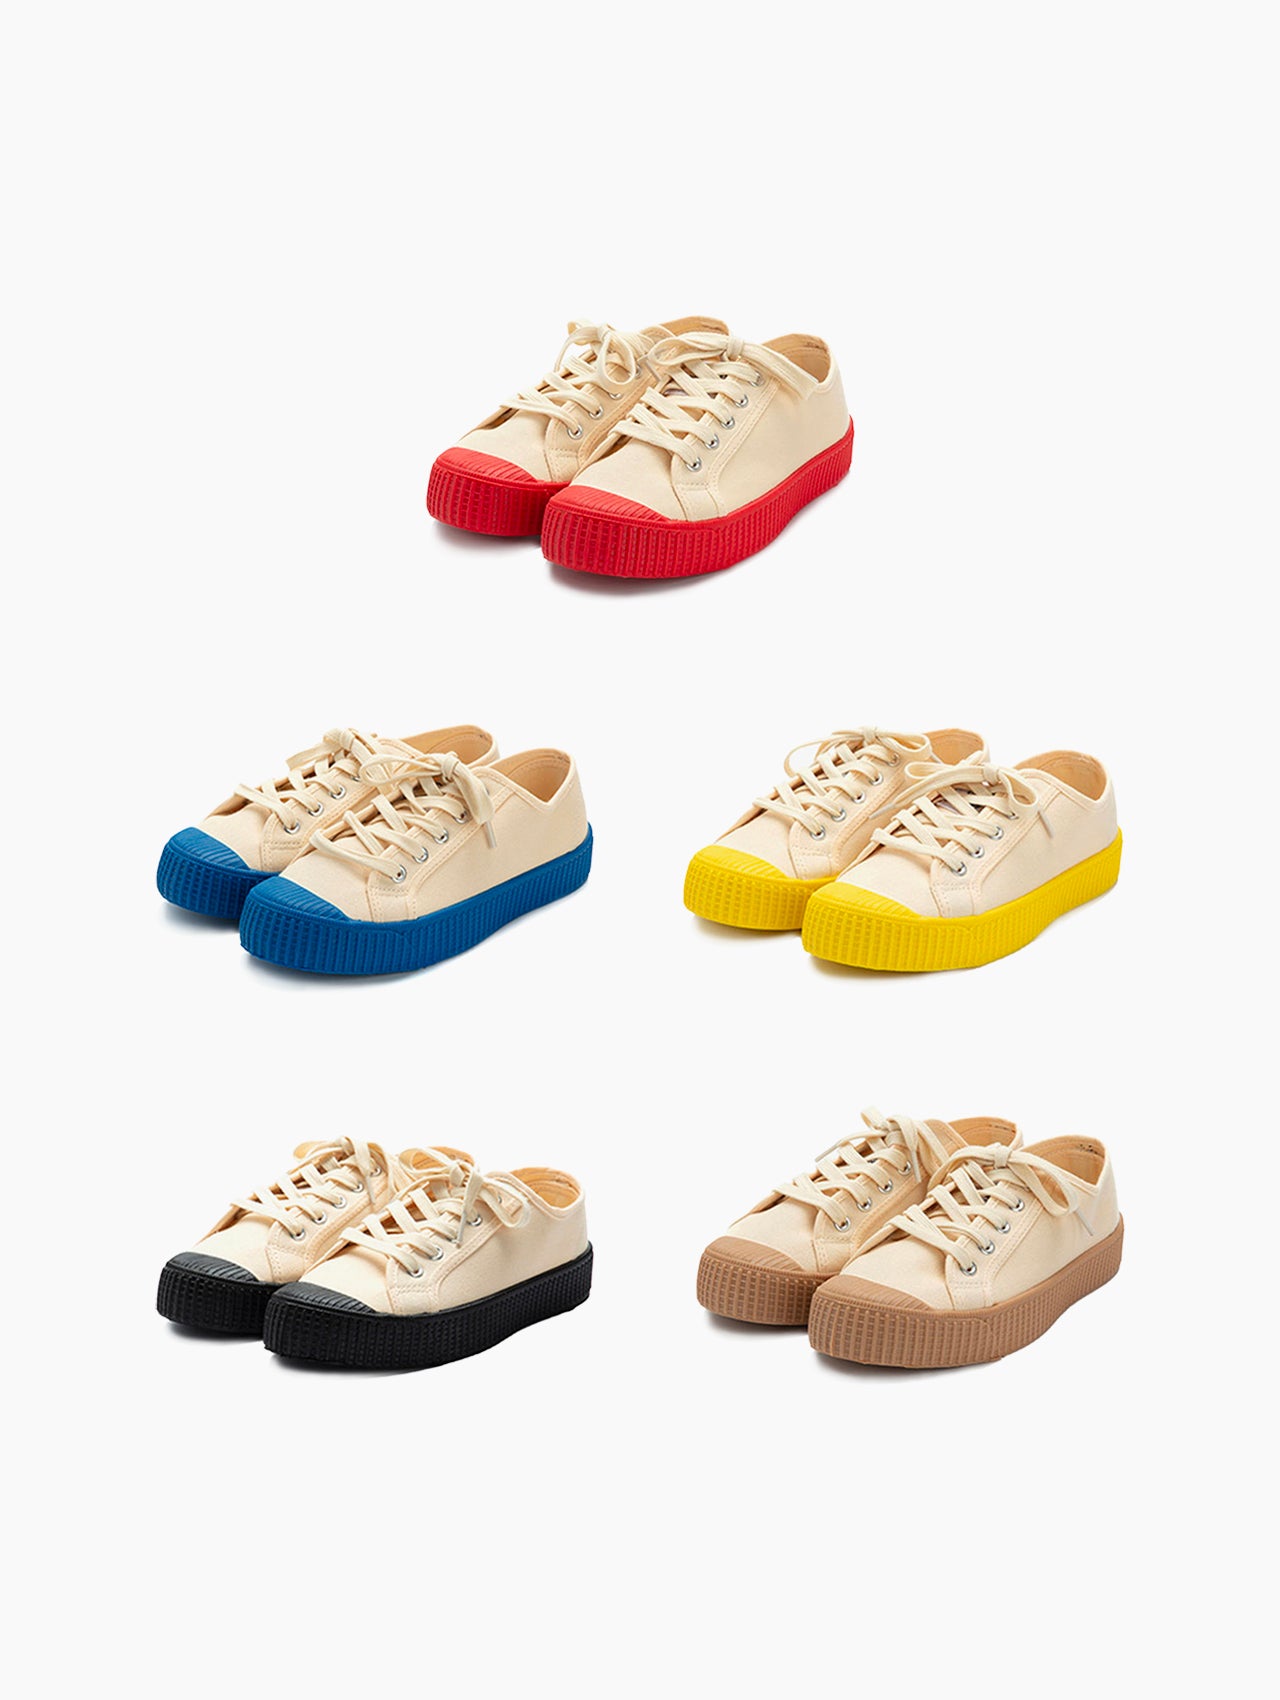 Adult Colorful Sole Canvas Sneaker